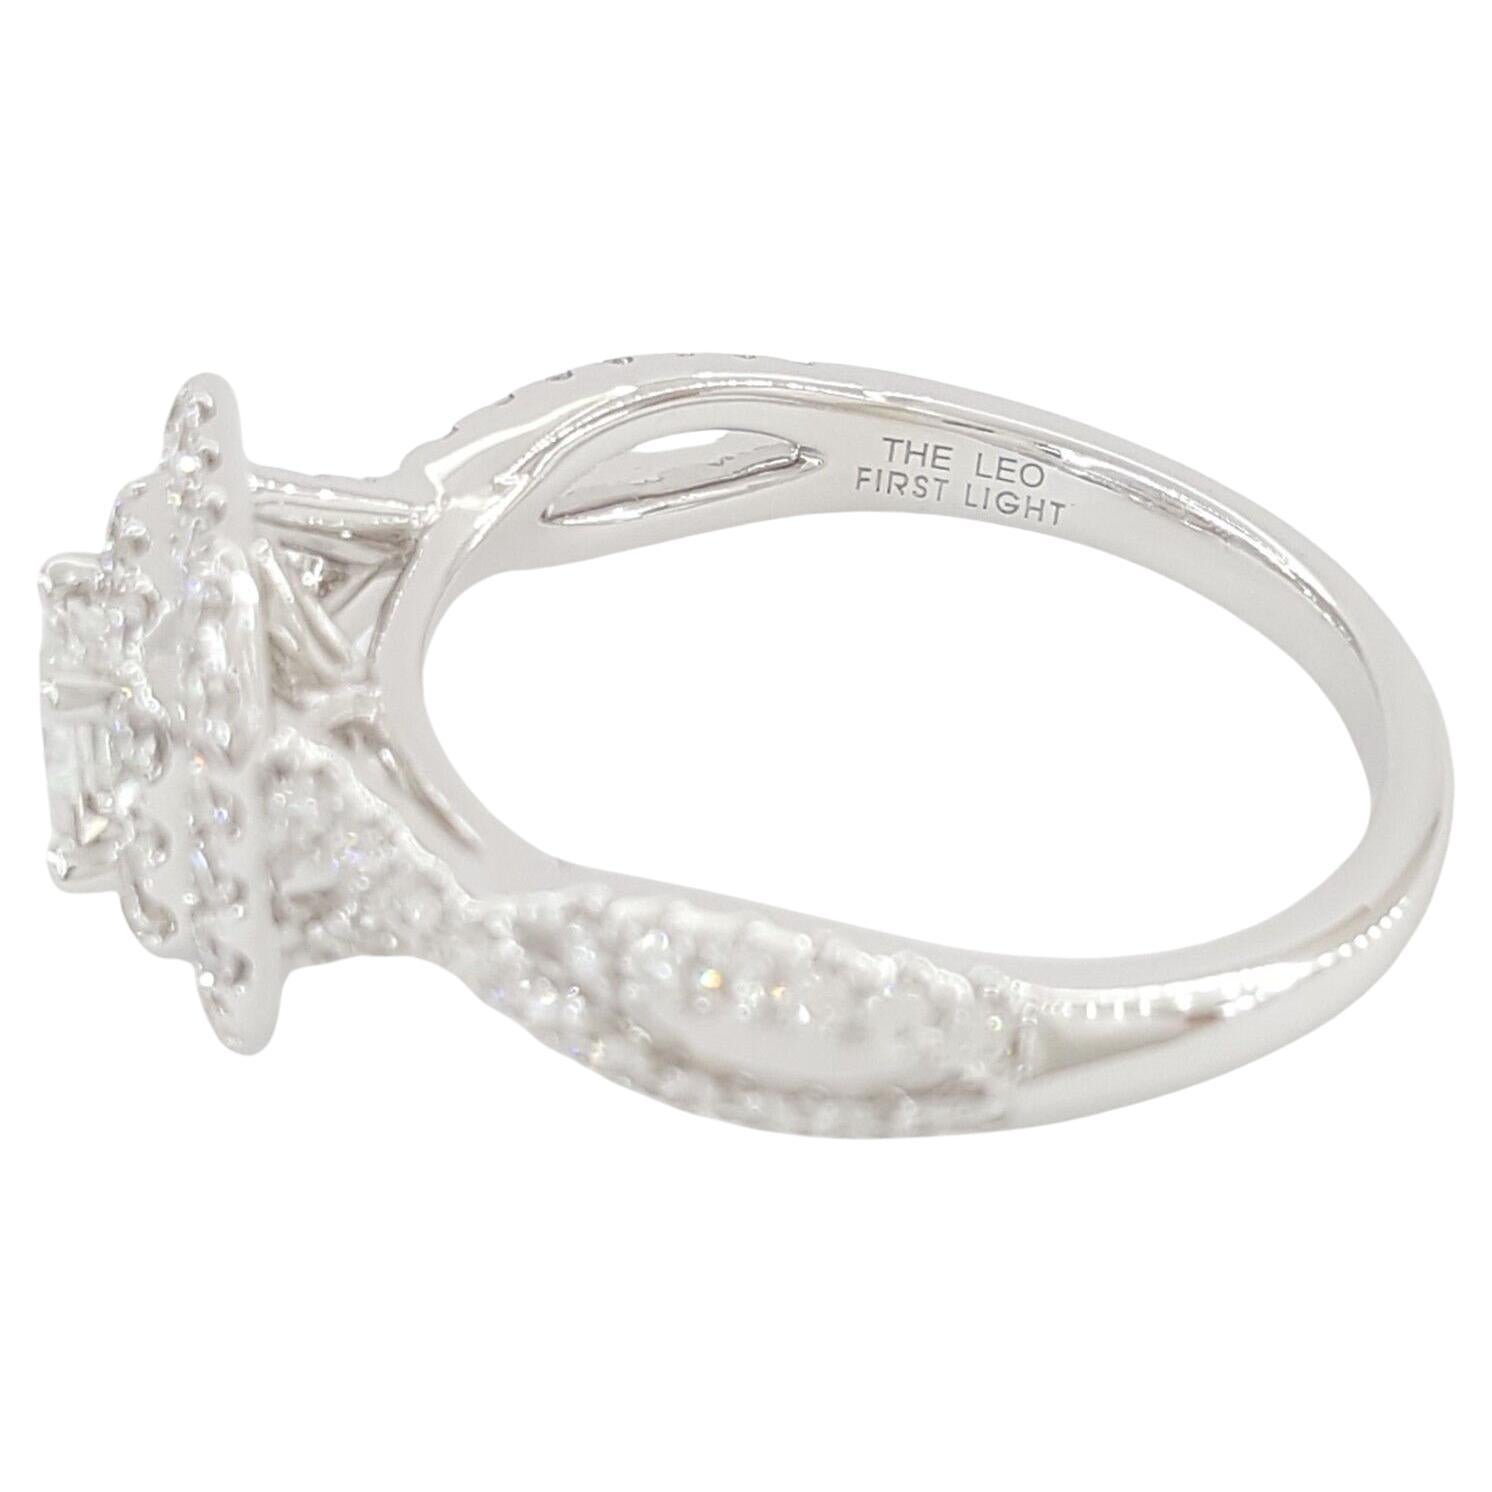  Leo First Light Diamond Engagement Ring, an exquisite symbol of love and commitment.

Crafted in luxurious 14k white gold, this enchanting ring boasts a total weight of 7/8 carats, promising timeless elegance and sophistication. Weighing 4.7 grams